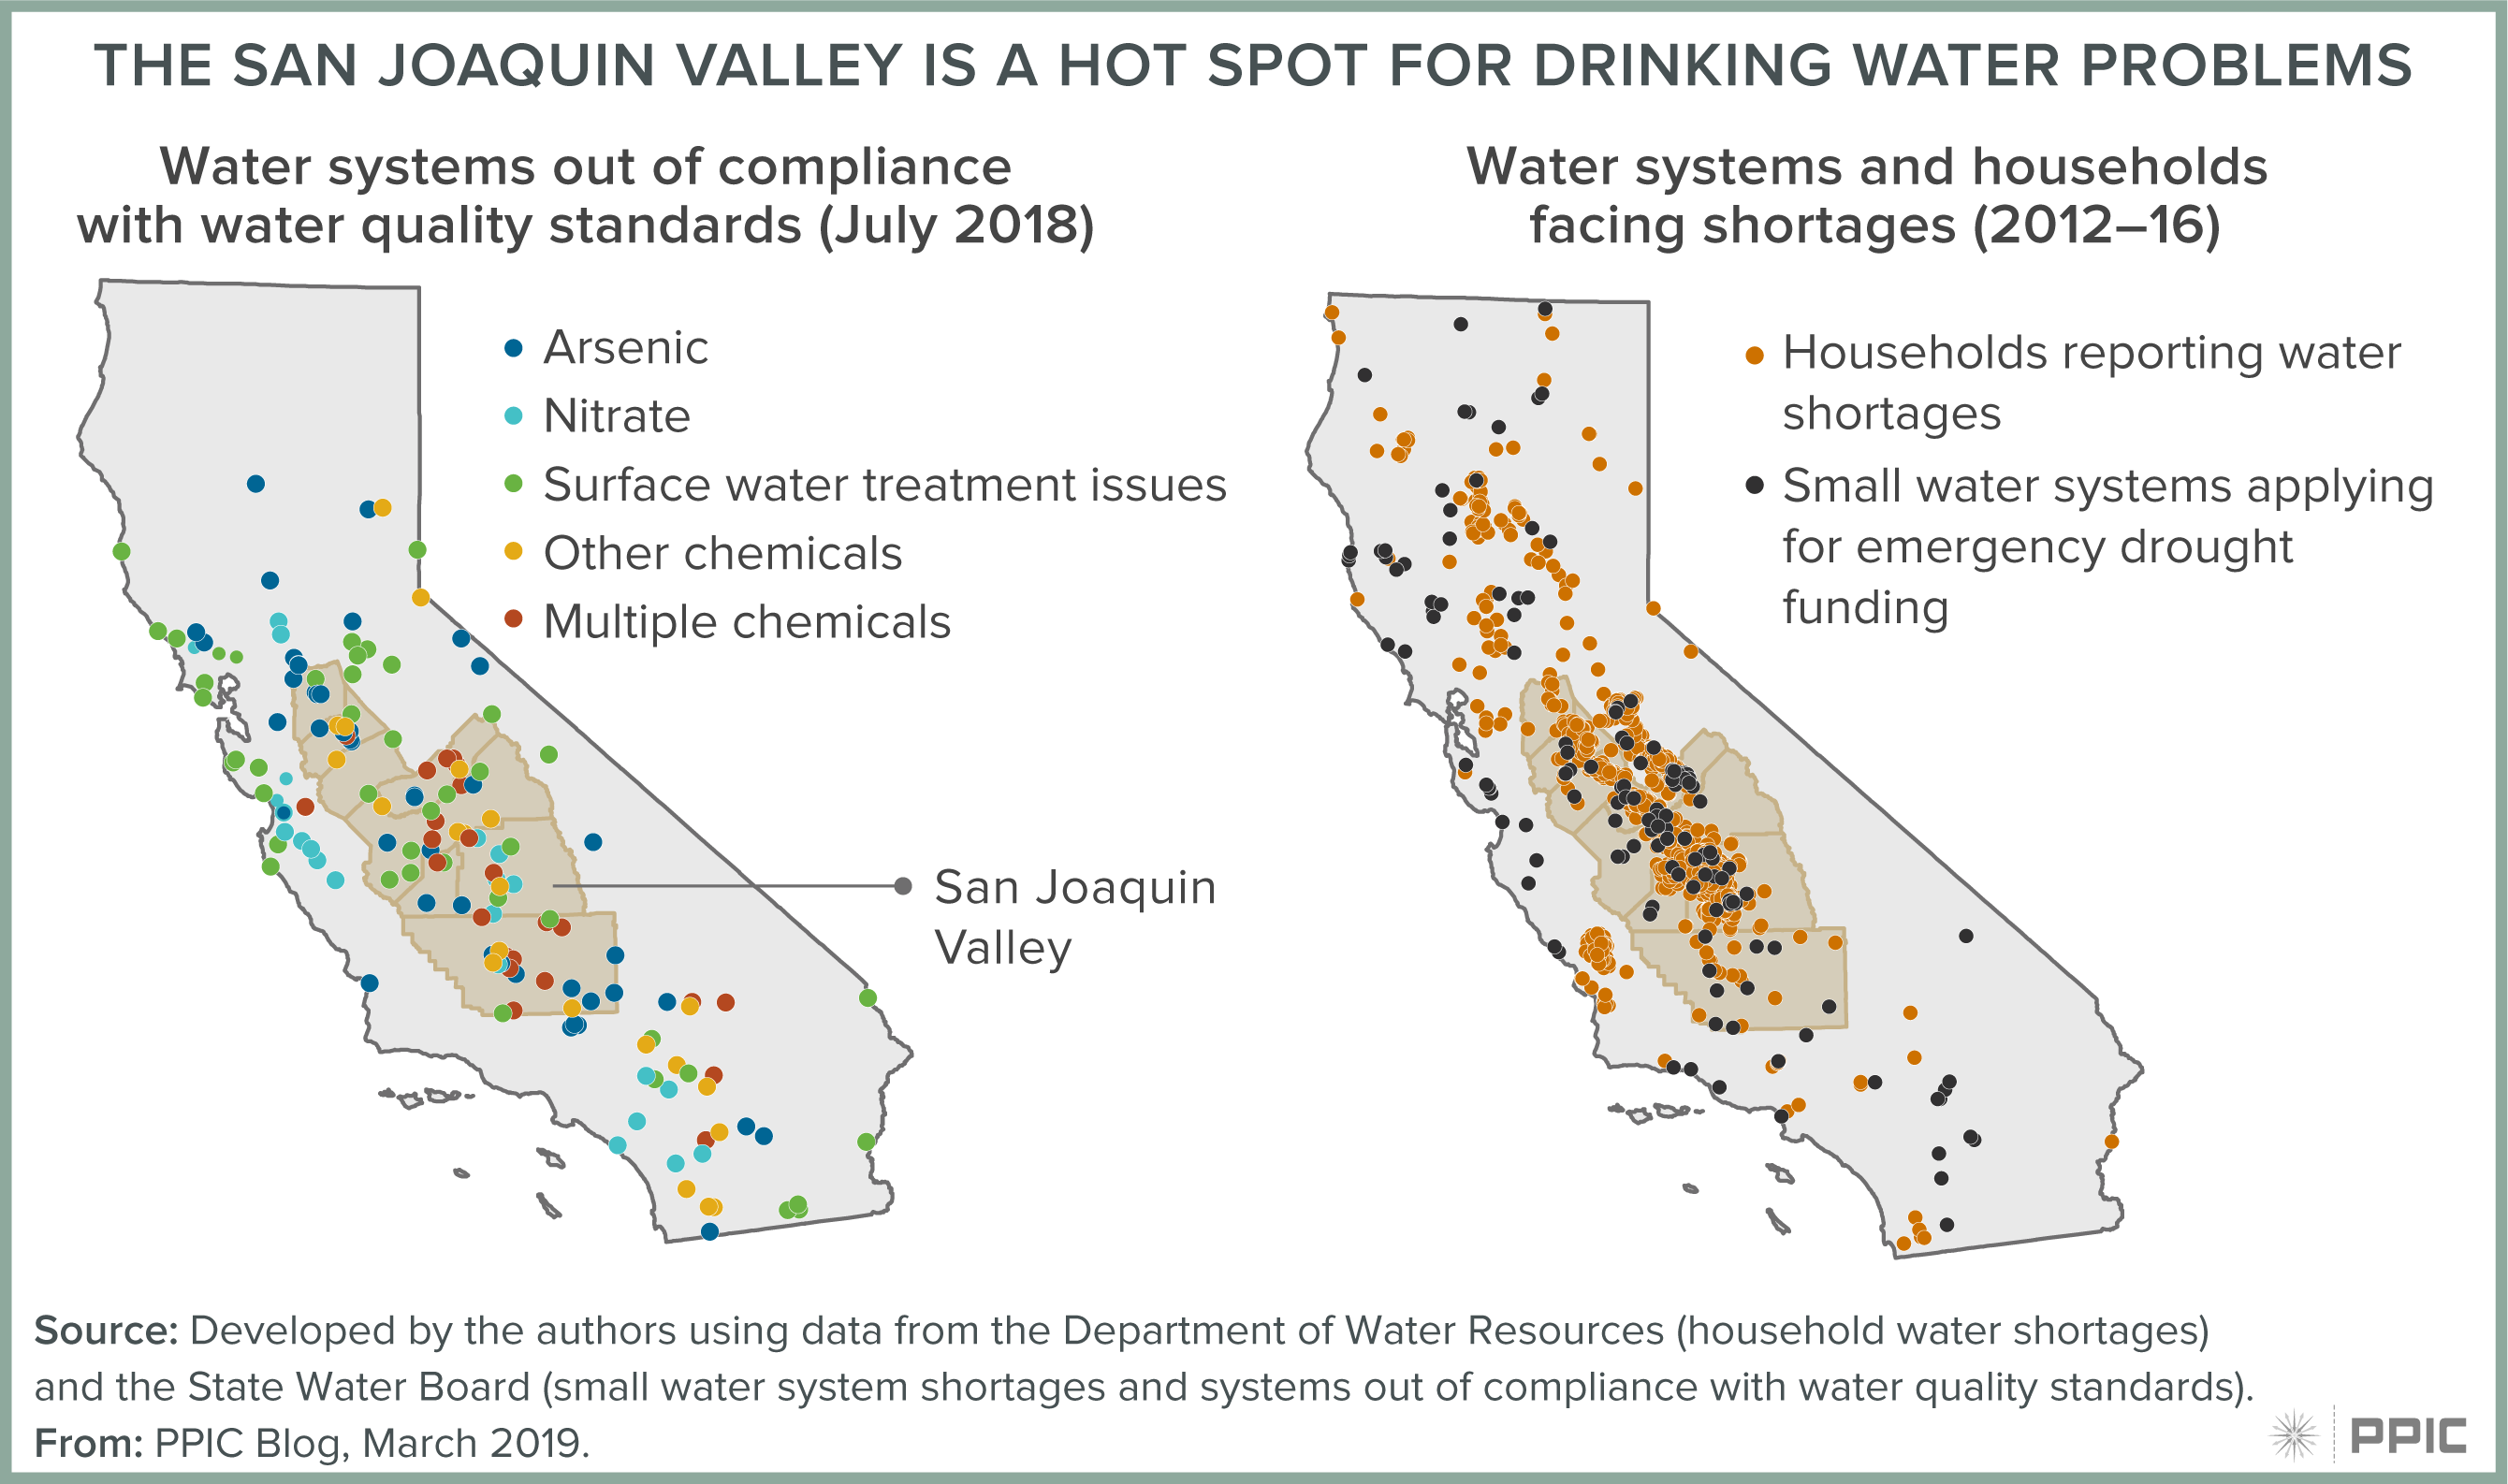 figure - The San Joaquin Valley Is a Hot Spot for Drinking Water Problems